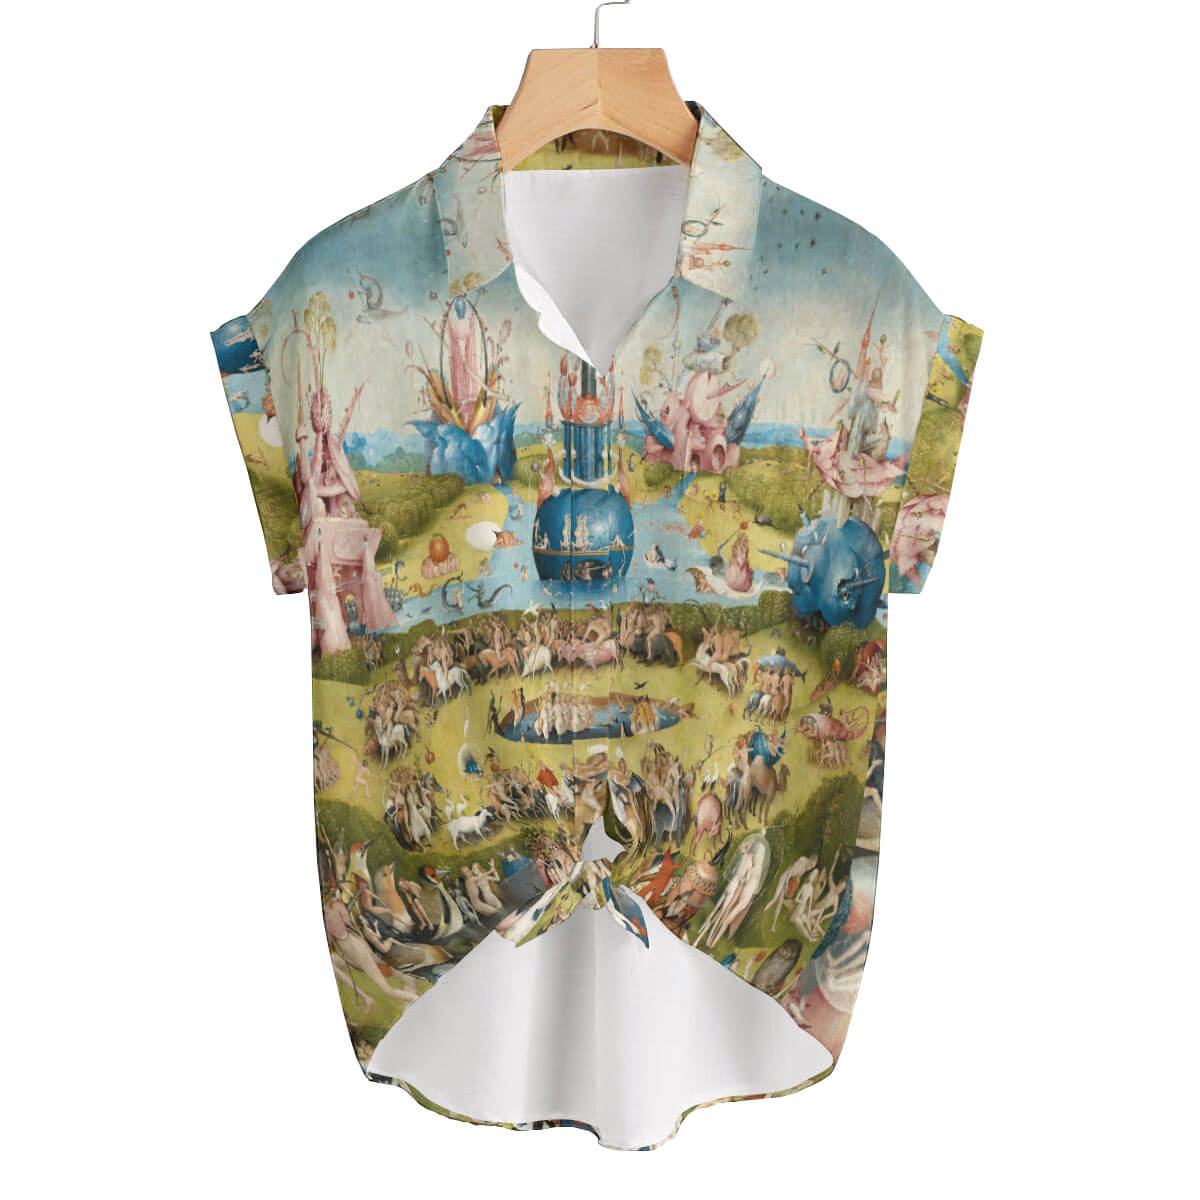 Hieronymus Bosch Garden of Earthly Delights T-shirt